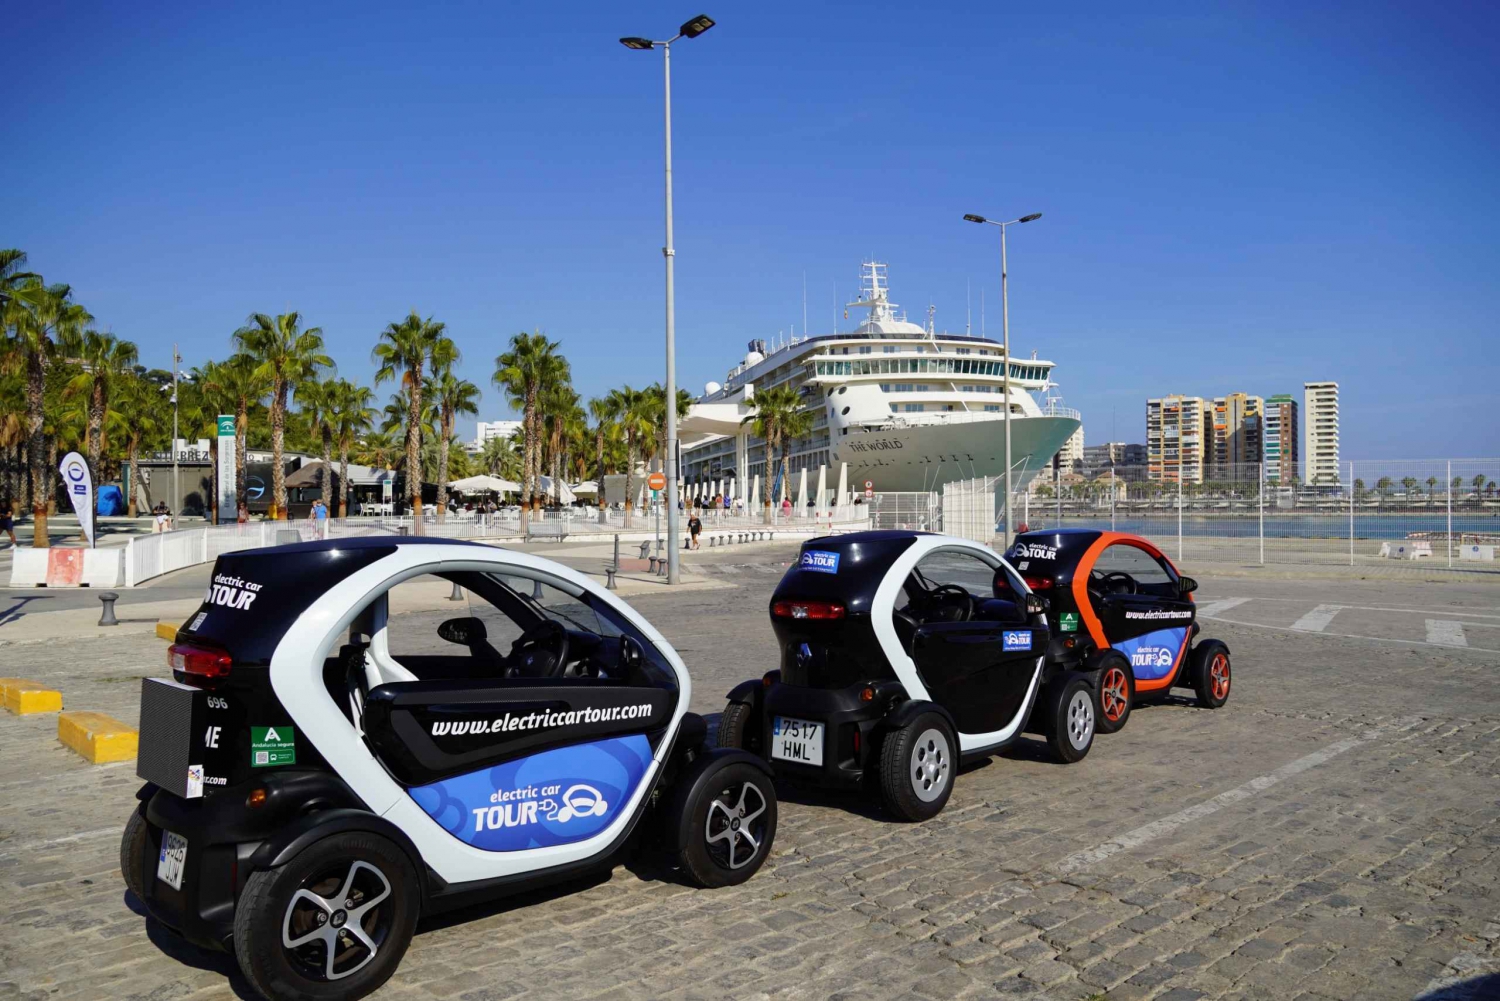 Nigth Tour in Malaga by ElectricCar.Enjoy the sunset